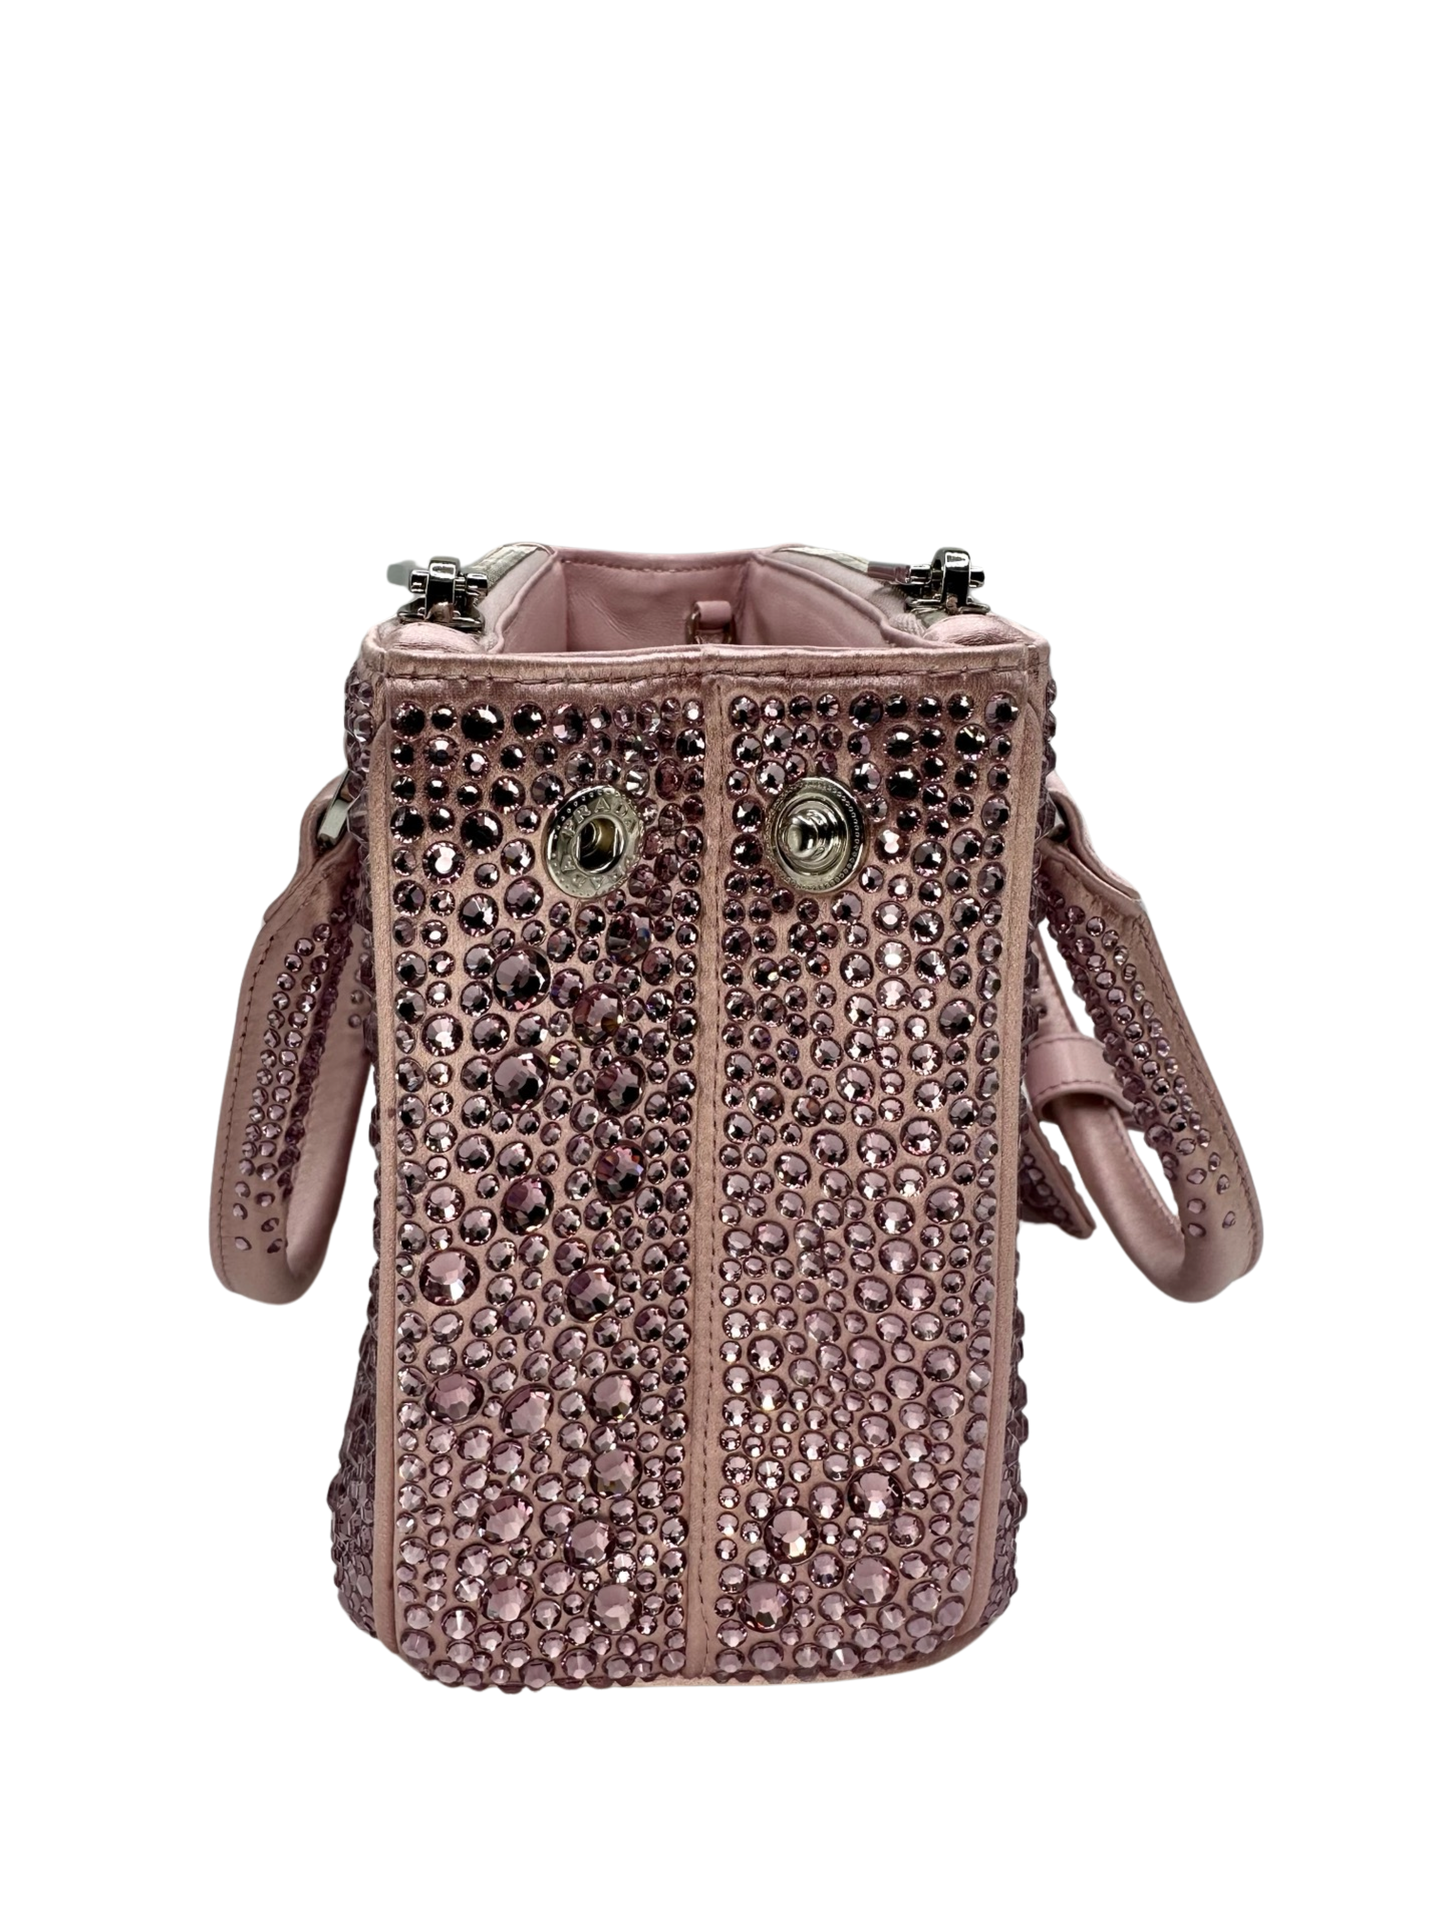 Pictured: The right side of the Prada Galleria Crystal mini satin bag in pink covered with pink crystals. It has 2 buttons on the side to close the bag. No imperfections.